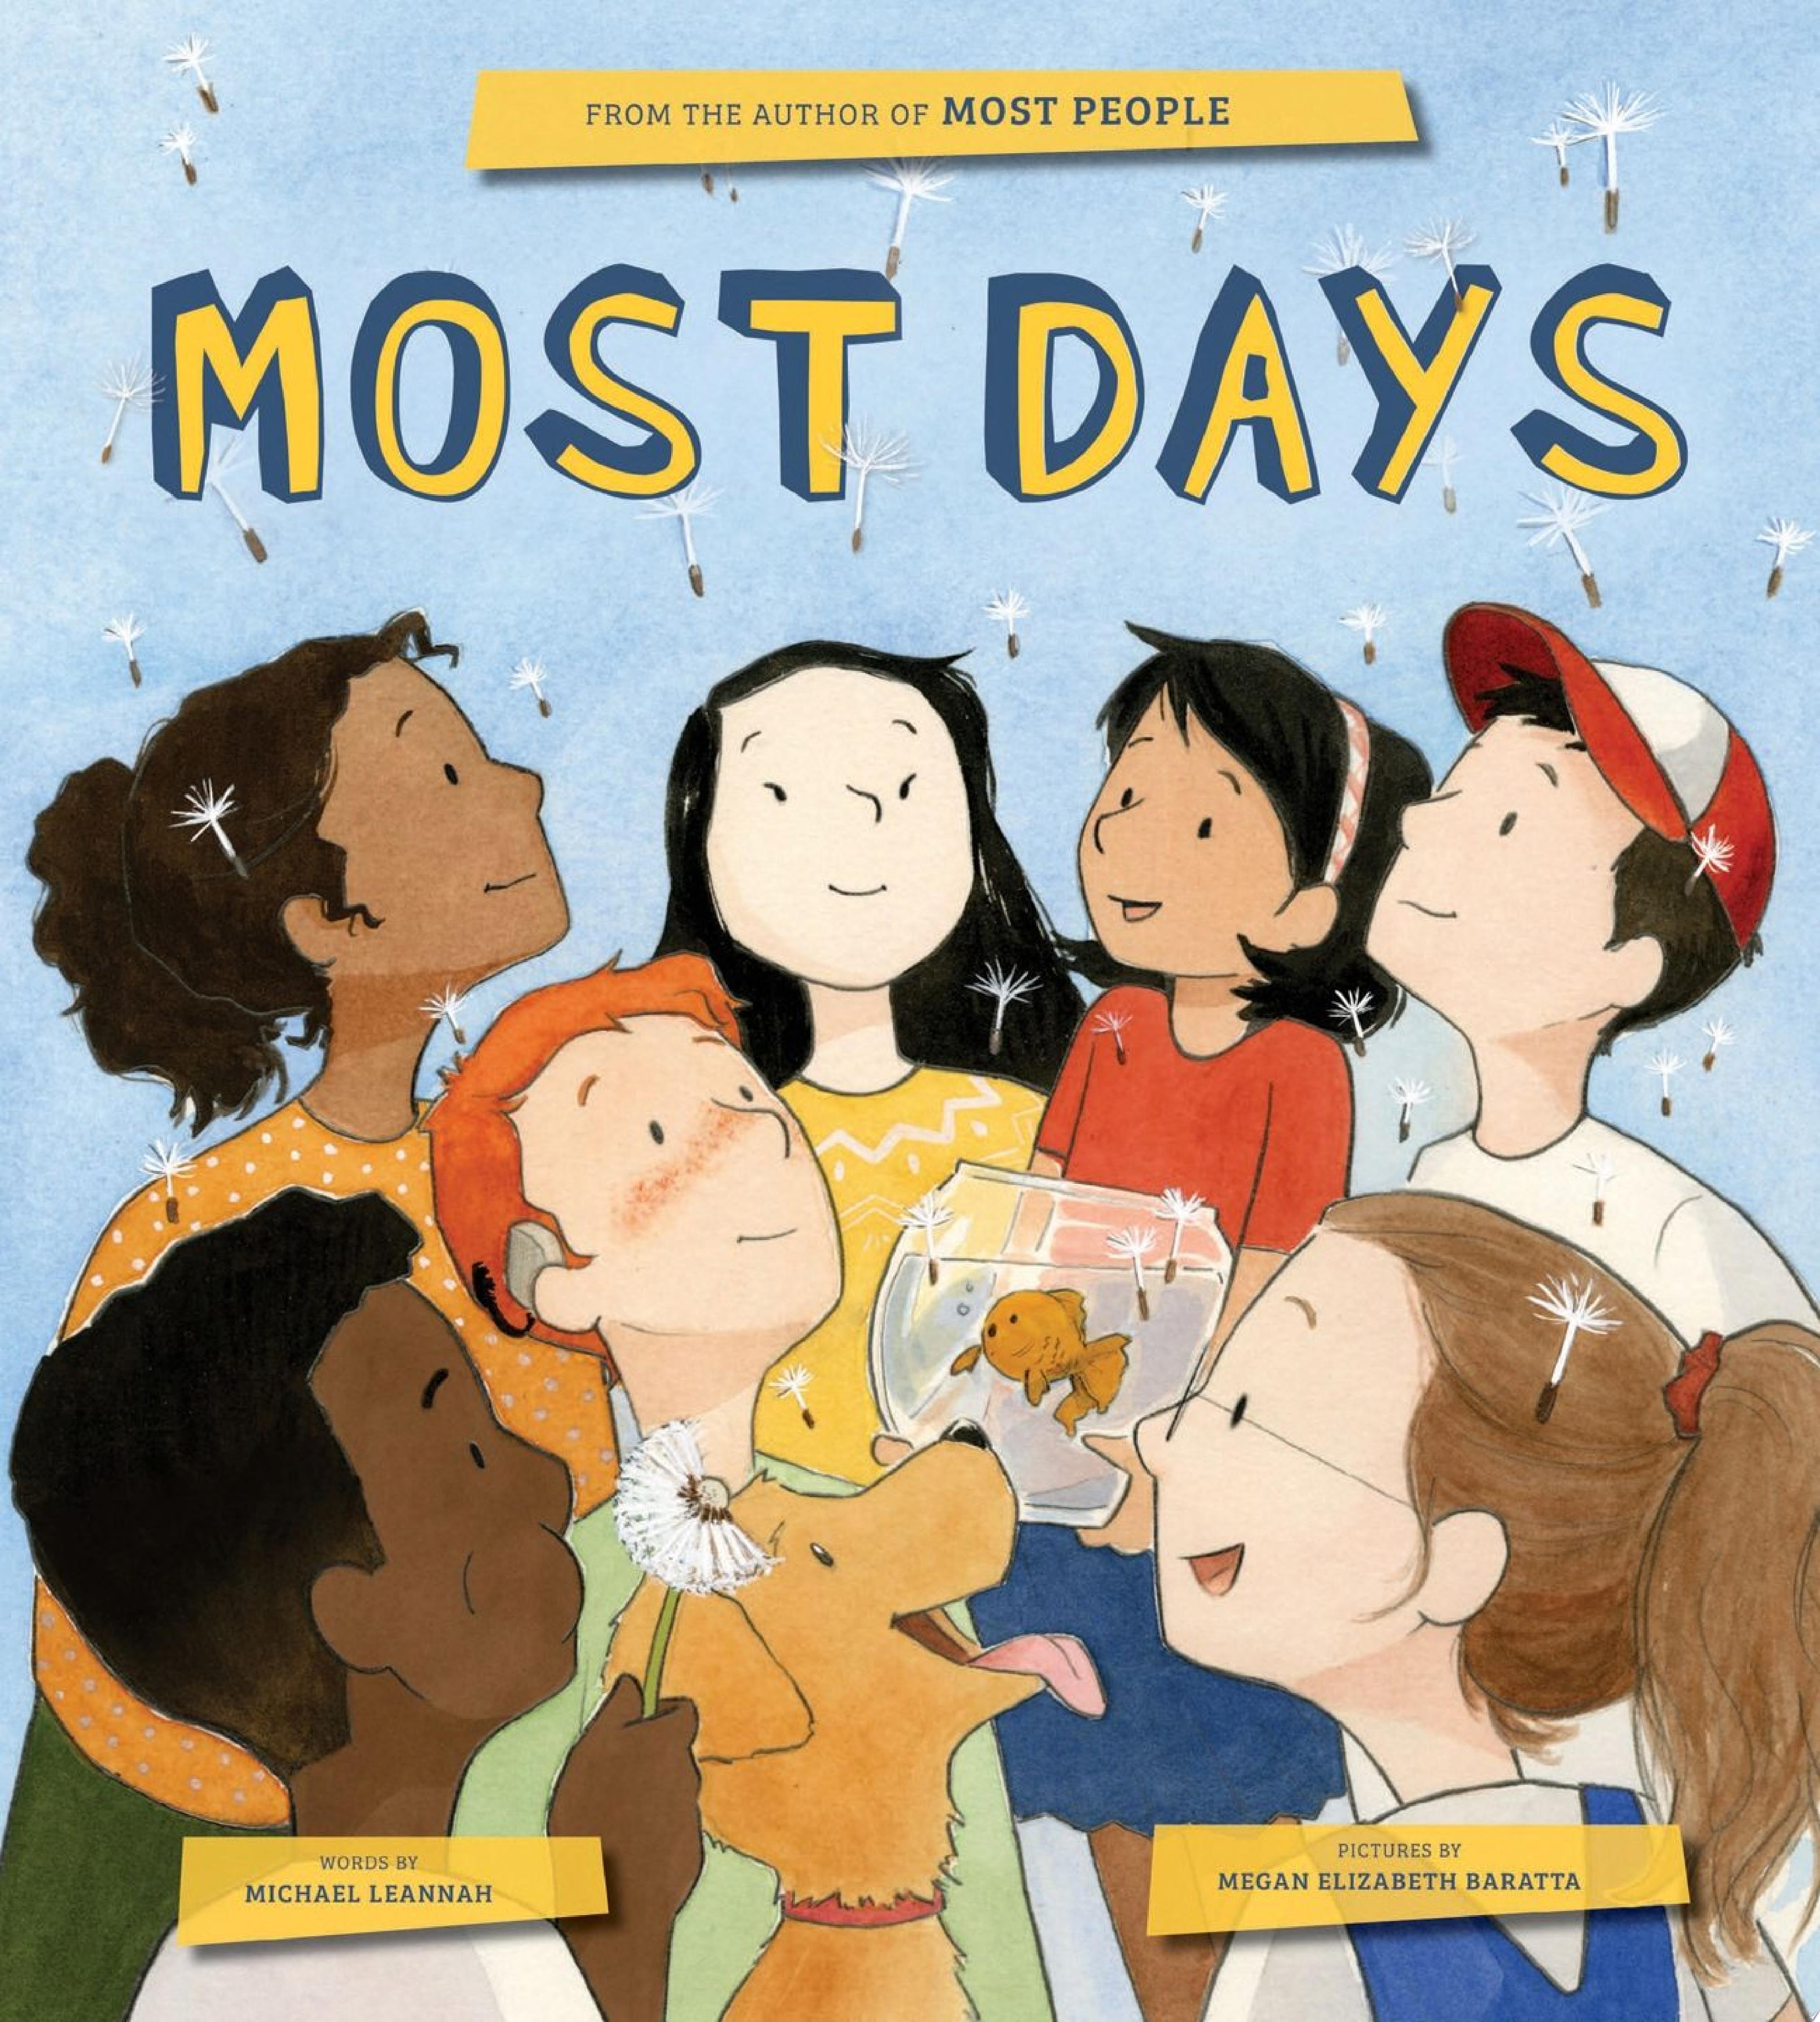 Image for "Most Days"